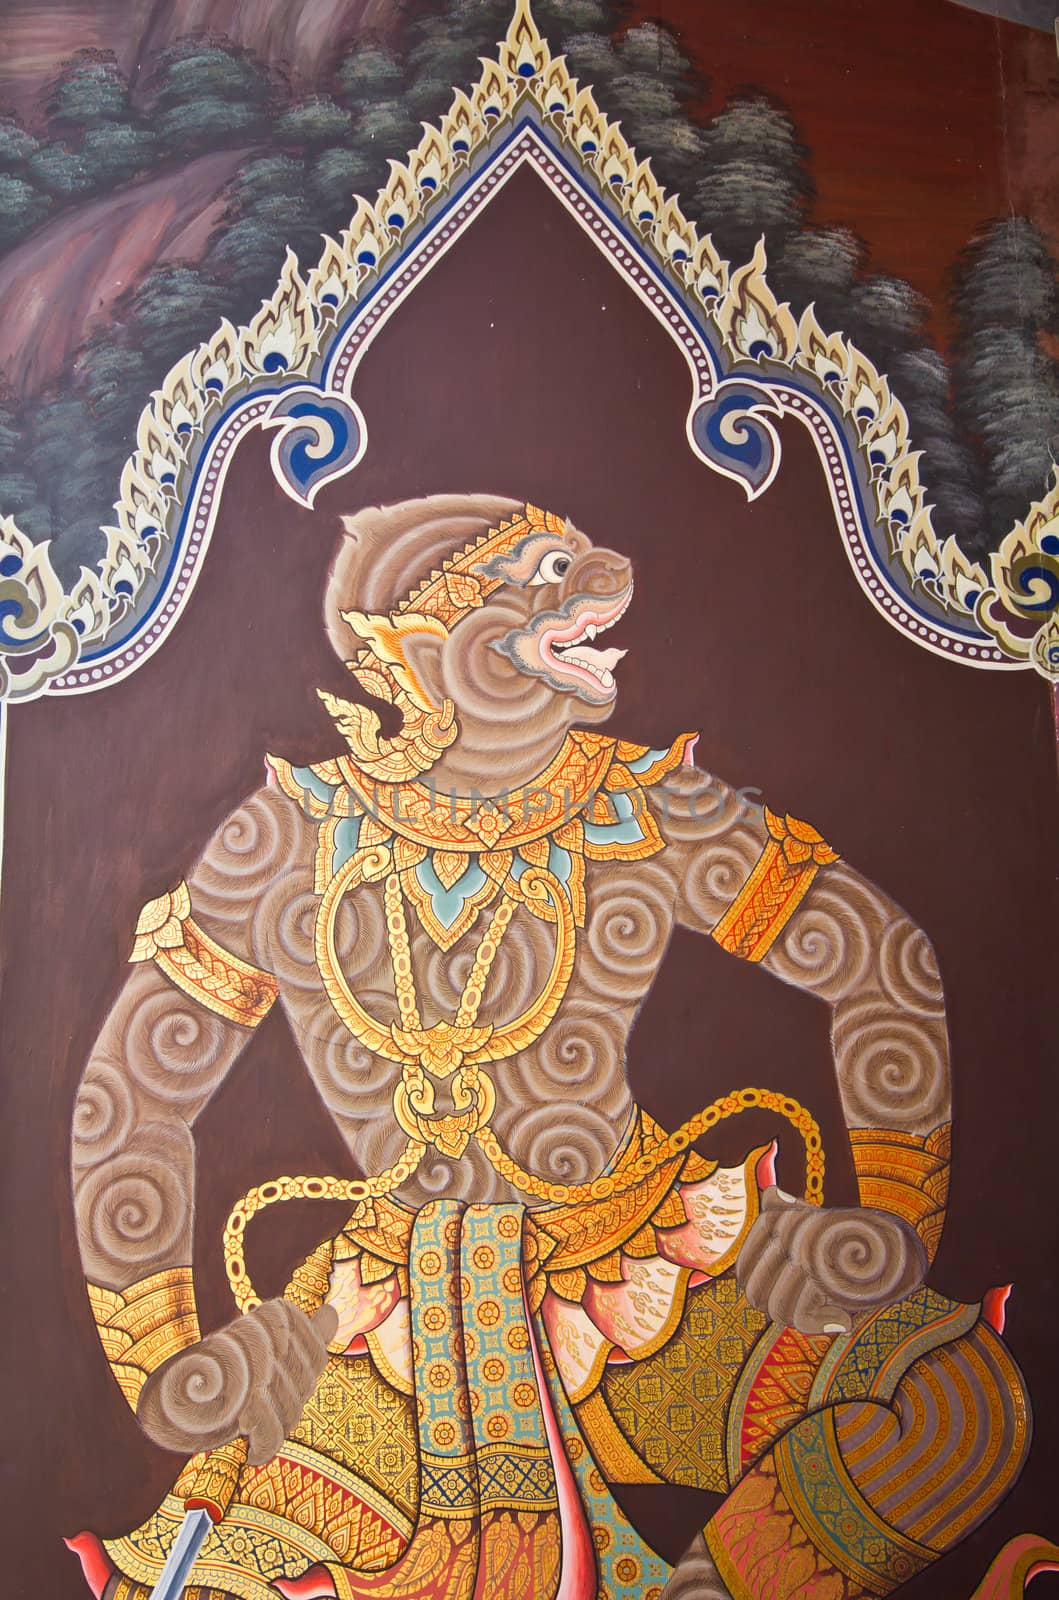 art thai painting on wall in temple by lavoview